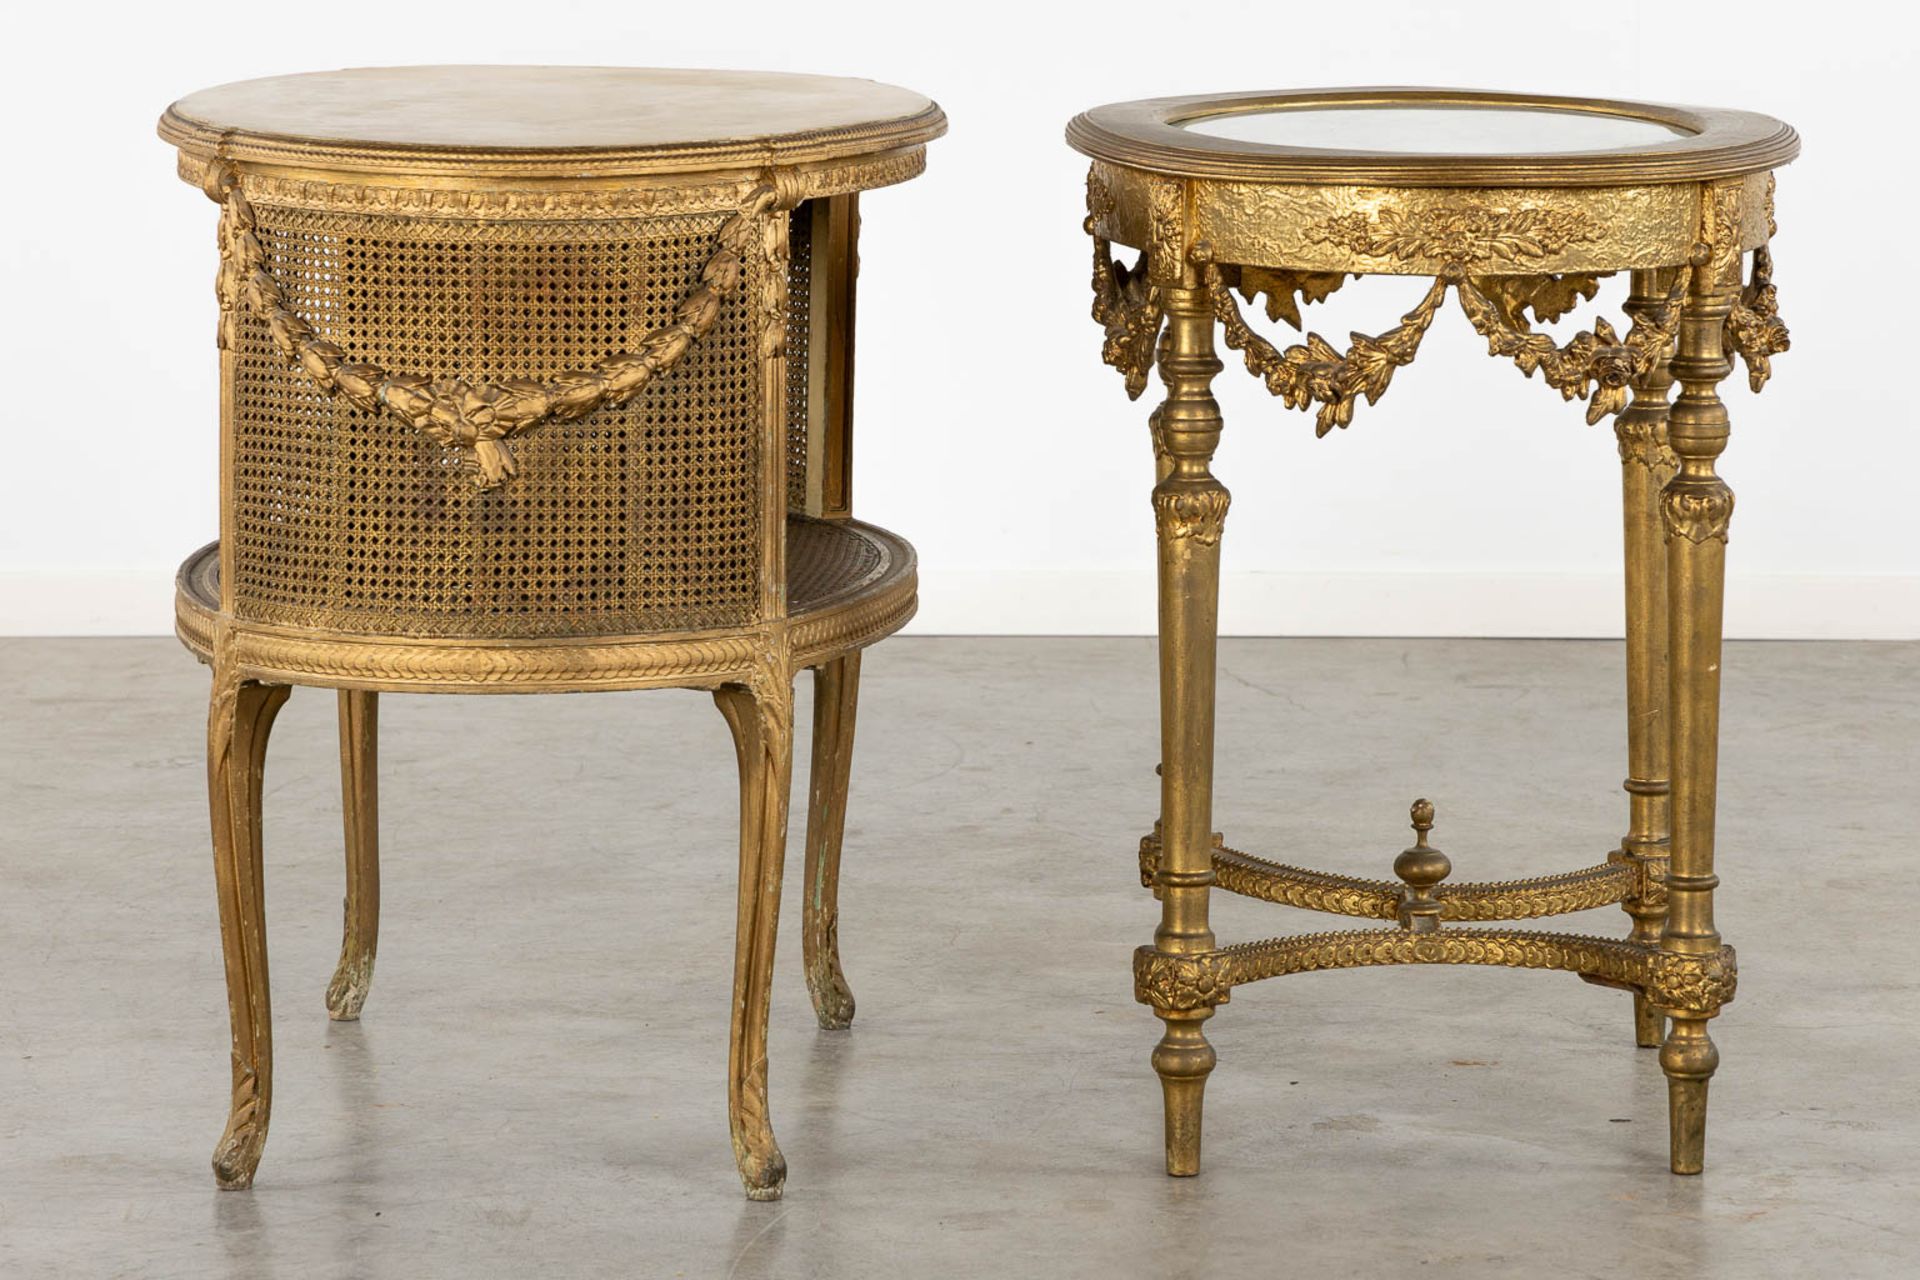 Two side tables, Two chairs, sculptured wood in Louis XVI style. Circa 1900. (L:57 x W:81 x H:75 cm) - Bild 4 aus 18